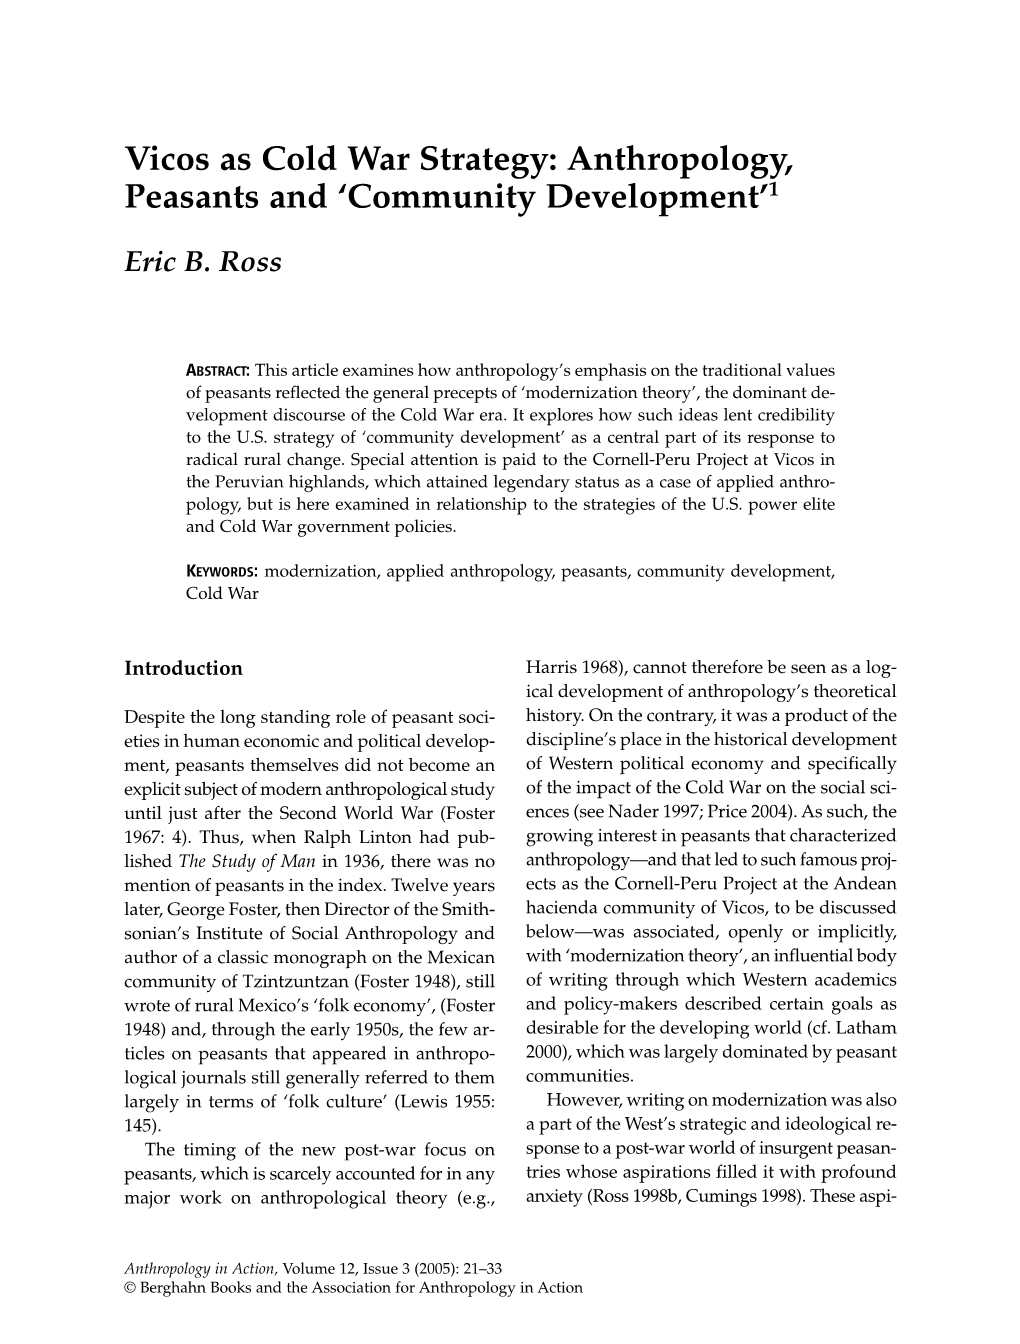 Vicos As Cold War Strategy: Anthropology, Peasants and ‘Community Development’1